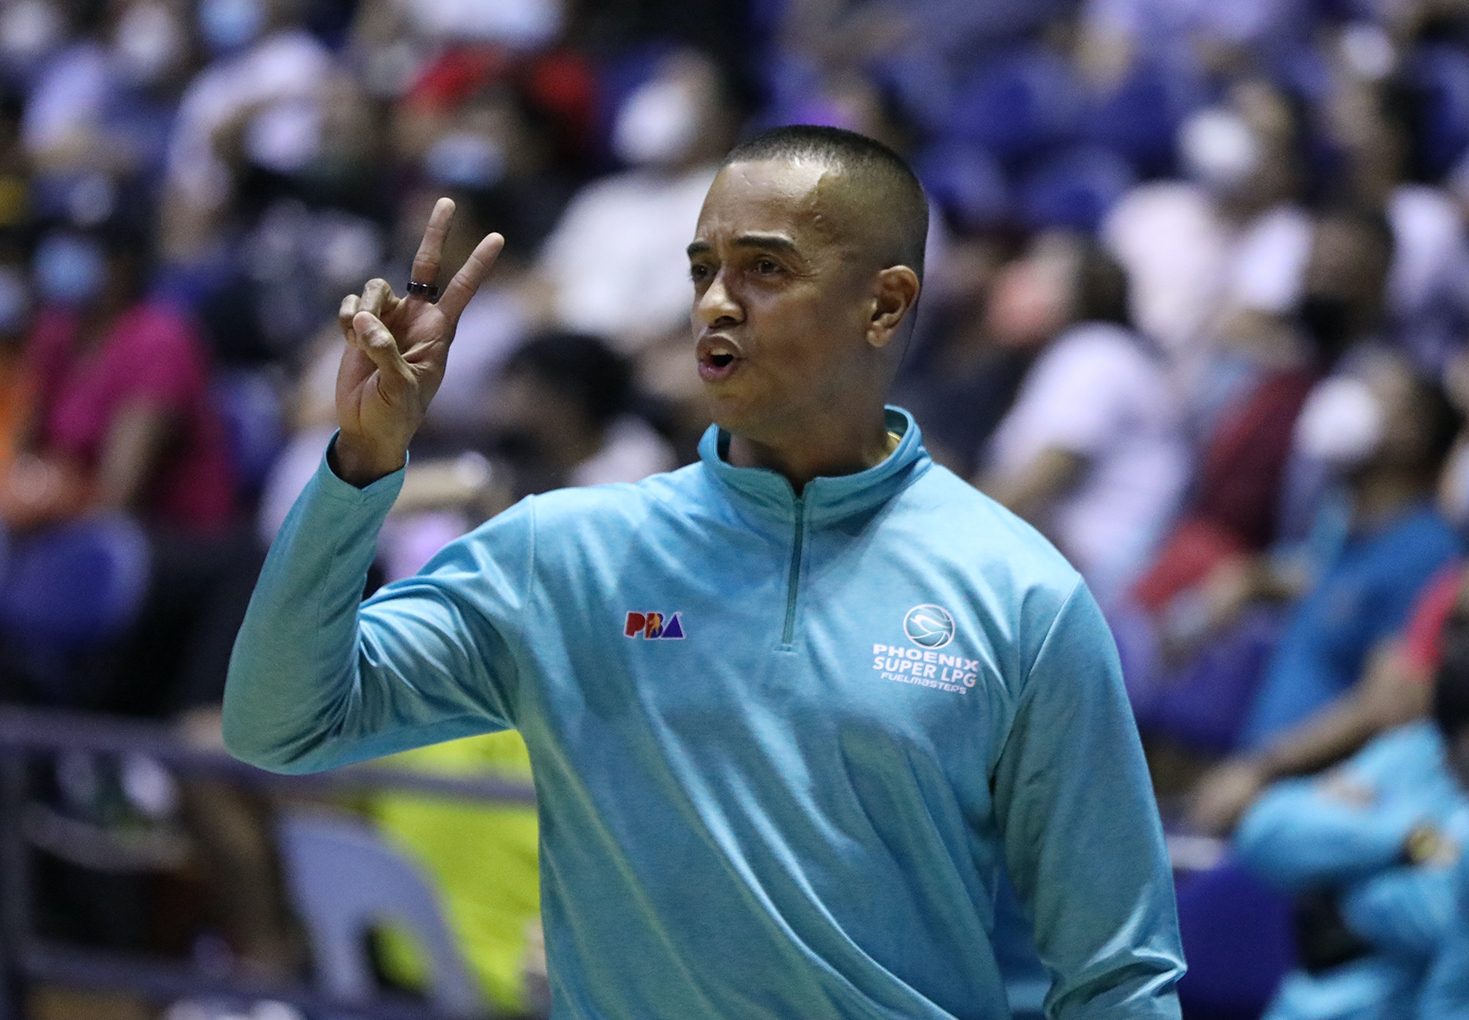 Owing his PBA career to Yeng Guiao, Topex Robinson pays it back